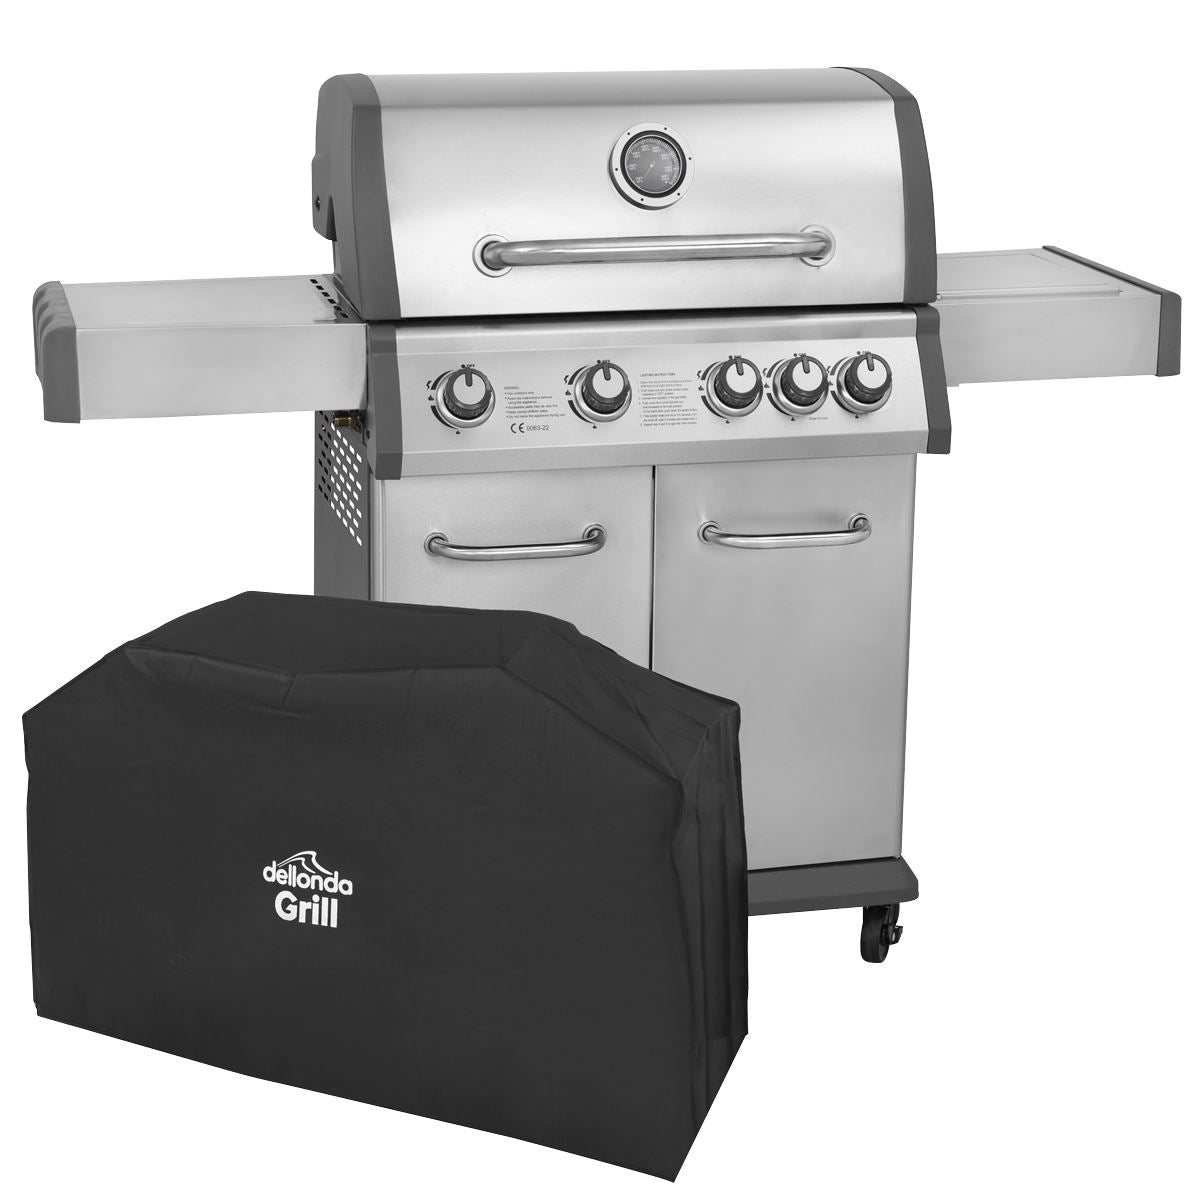 Dellonda 4+1 Burner Deluxe Gas BBQ with Piezo Ignition & Water-Resistant Oxford Style Cover, Stainless Steel